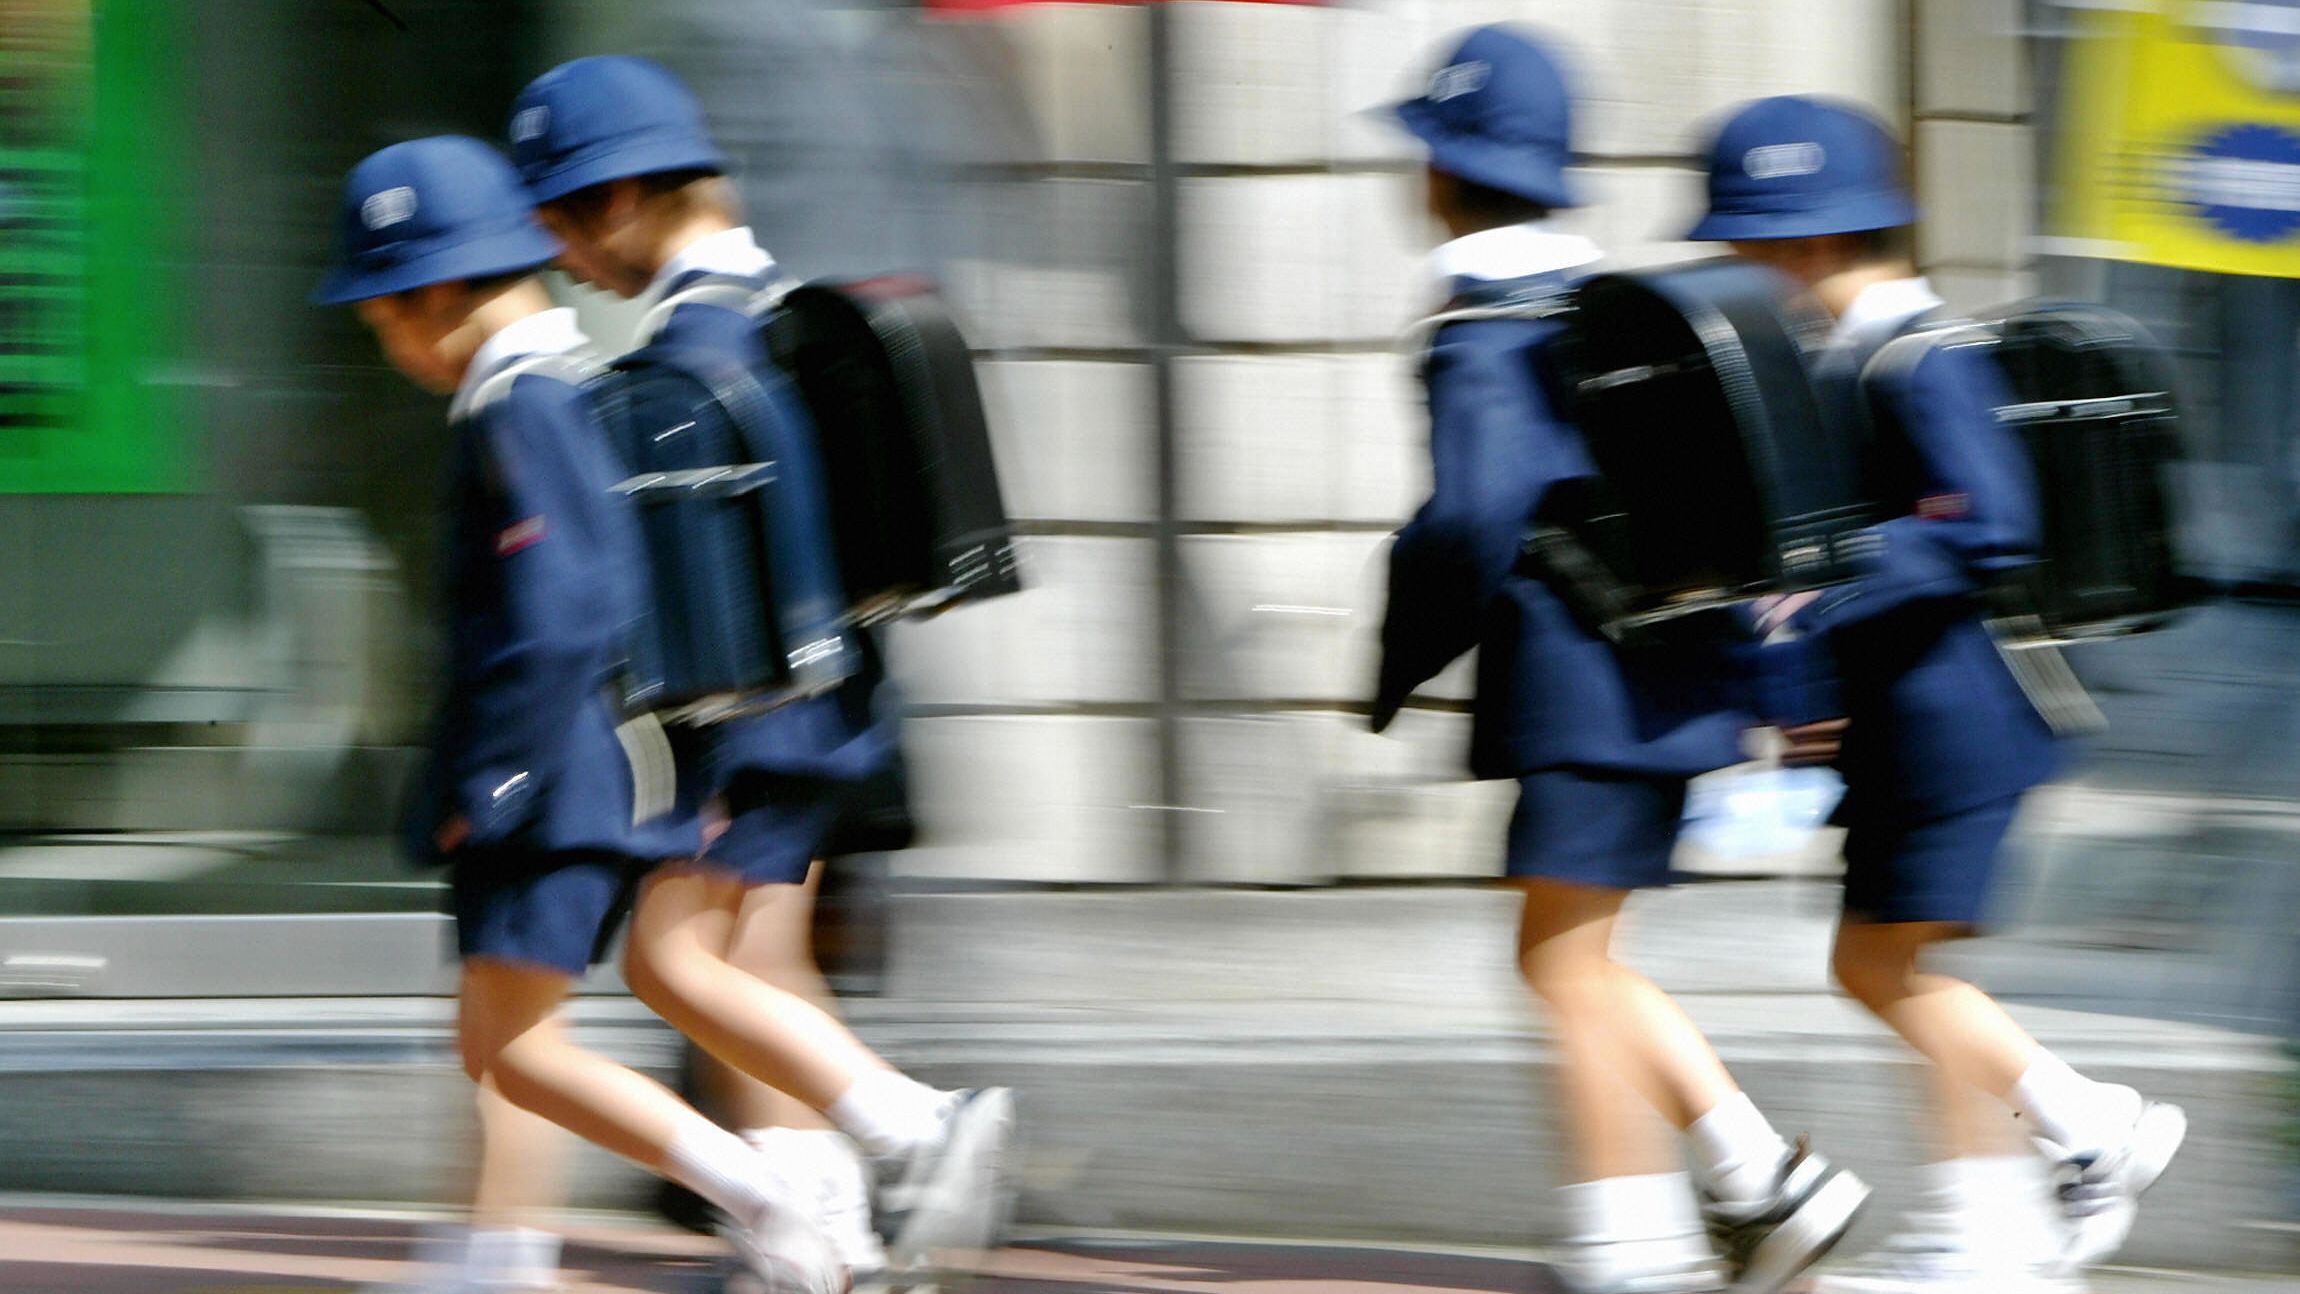 Tokyo schoolchildren make their way home from class in this 2004 file photo. Japan is experiencing its highest-ever number of reports of child abuse.